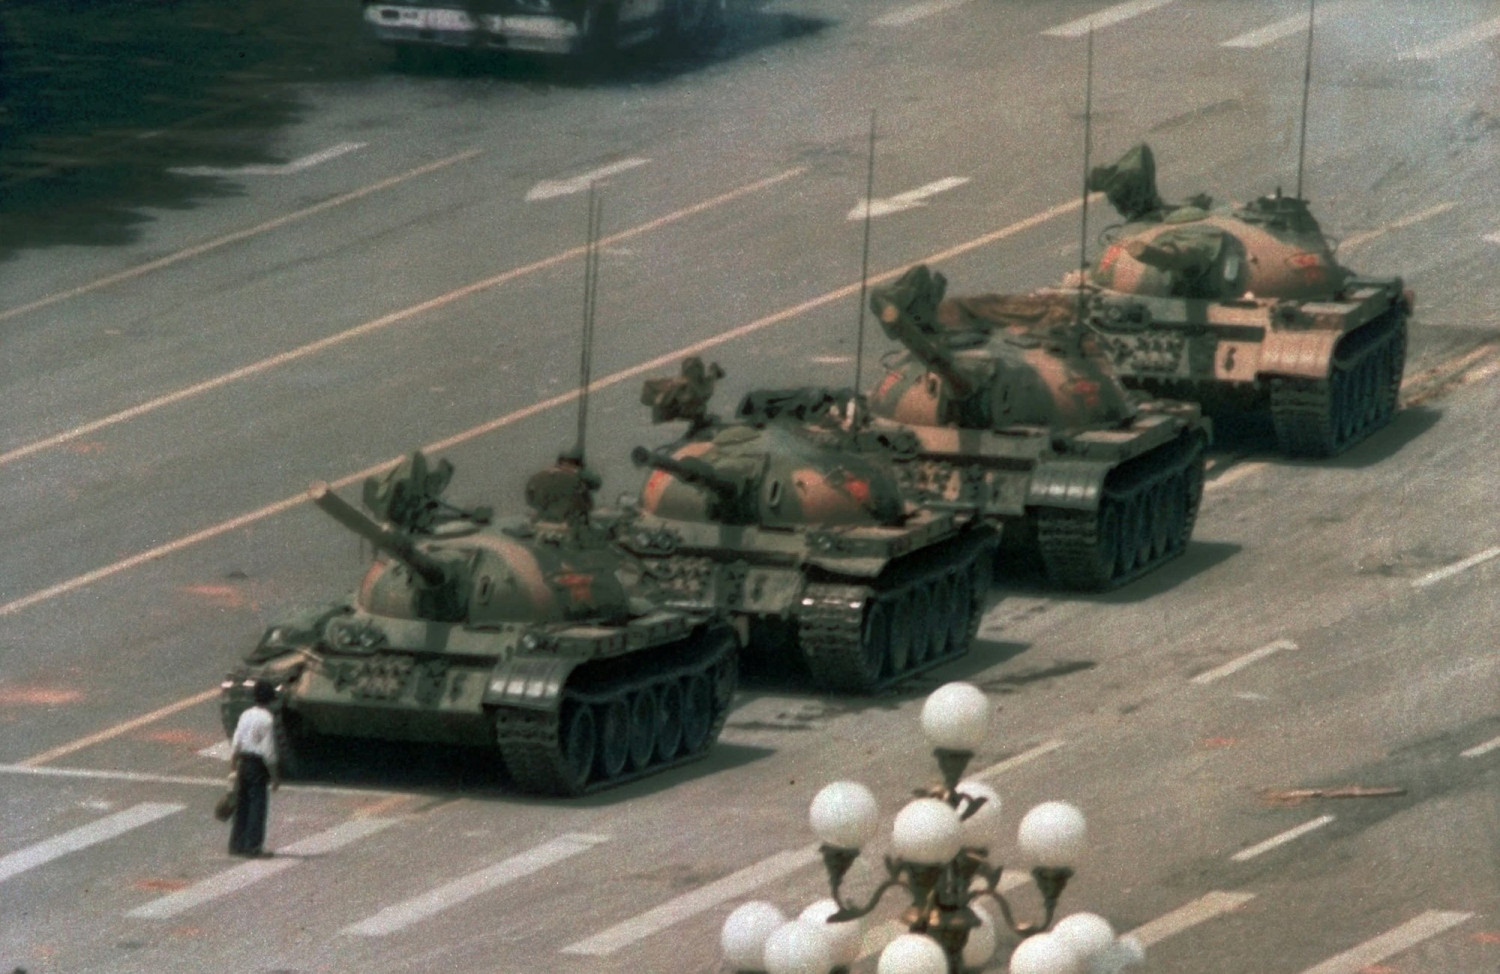 33 Years Later, Tiananmen Square Massacre Still Matters to the World, Chinese Activists Say